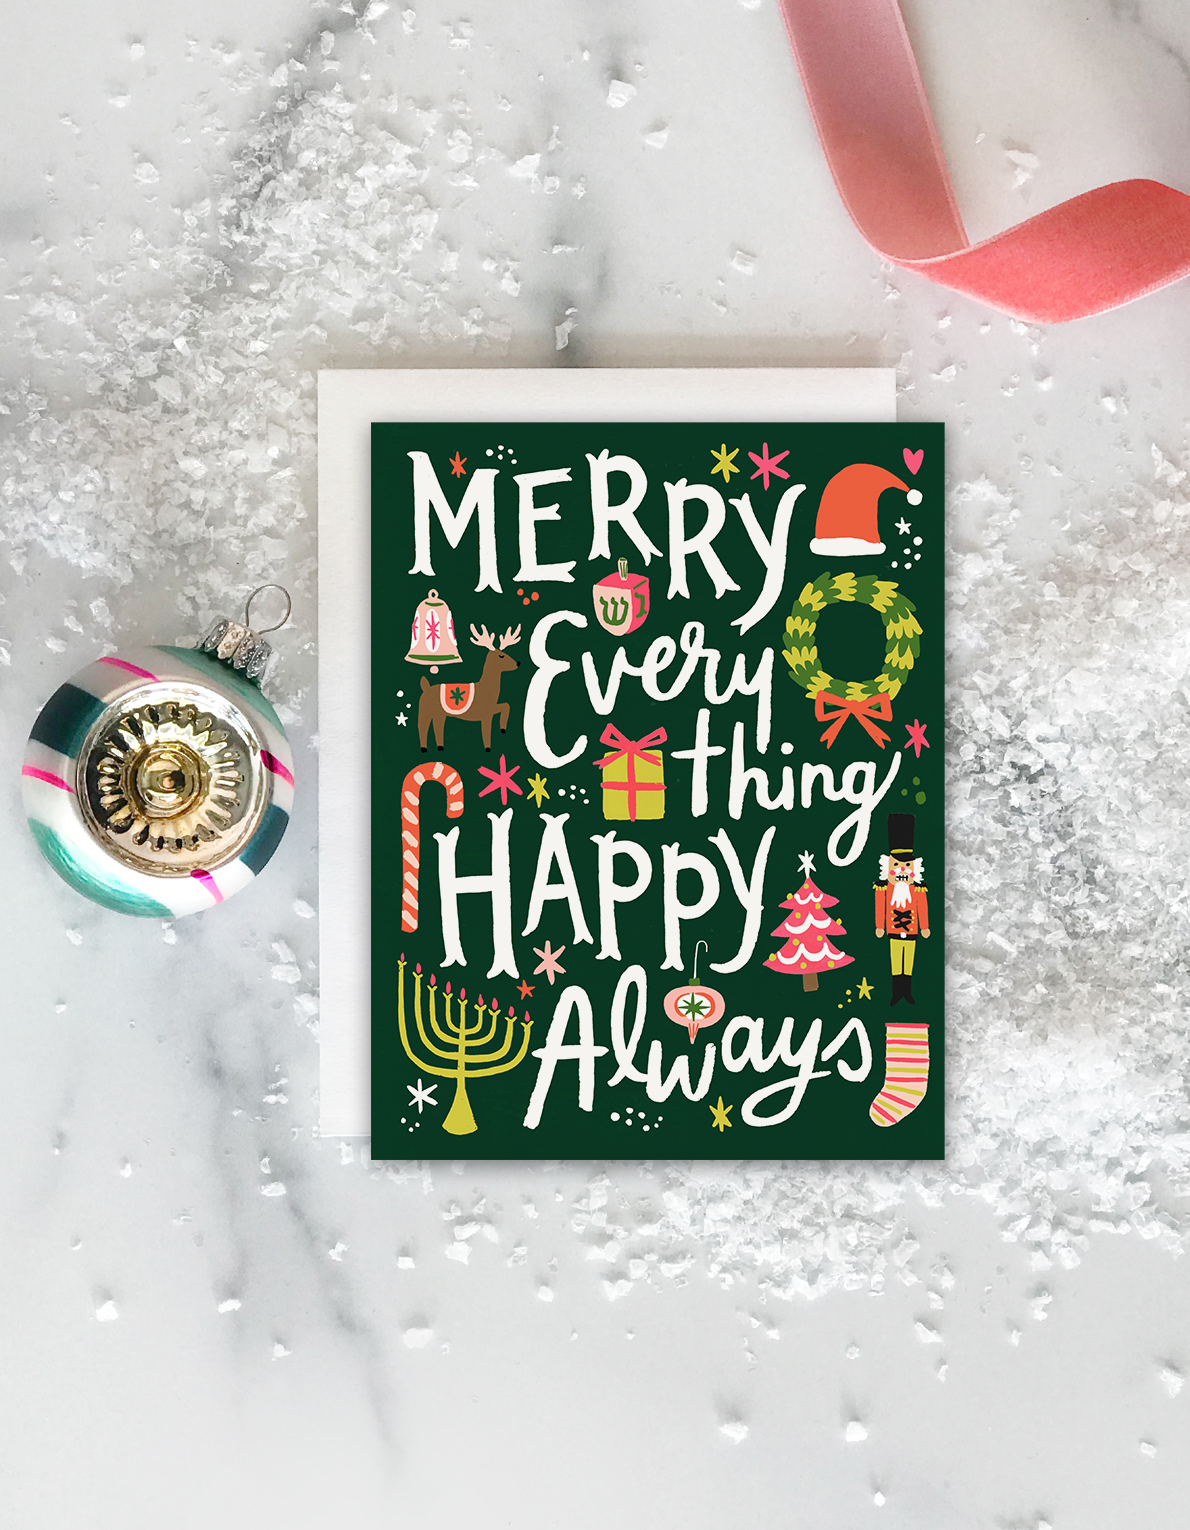 Merry Everything Happy Always Holiday Gift Tags